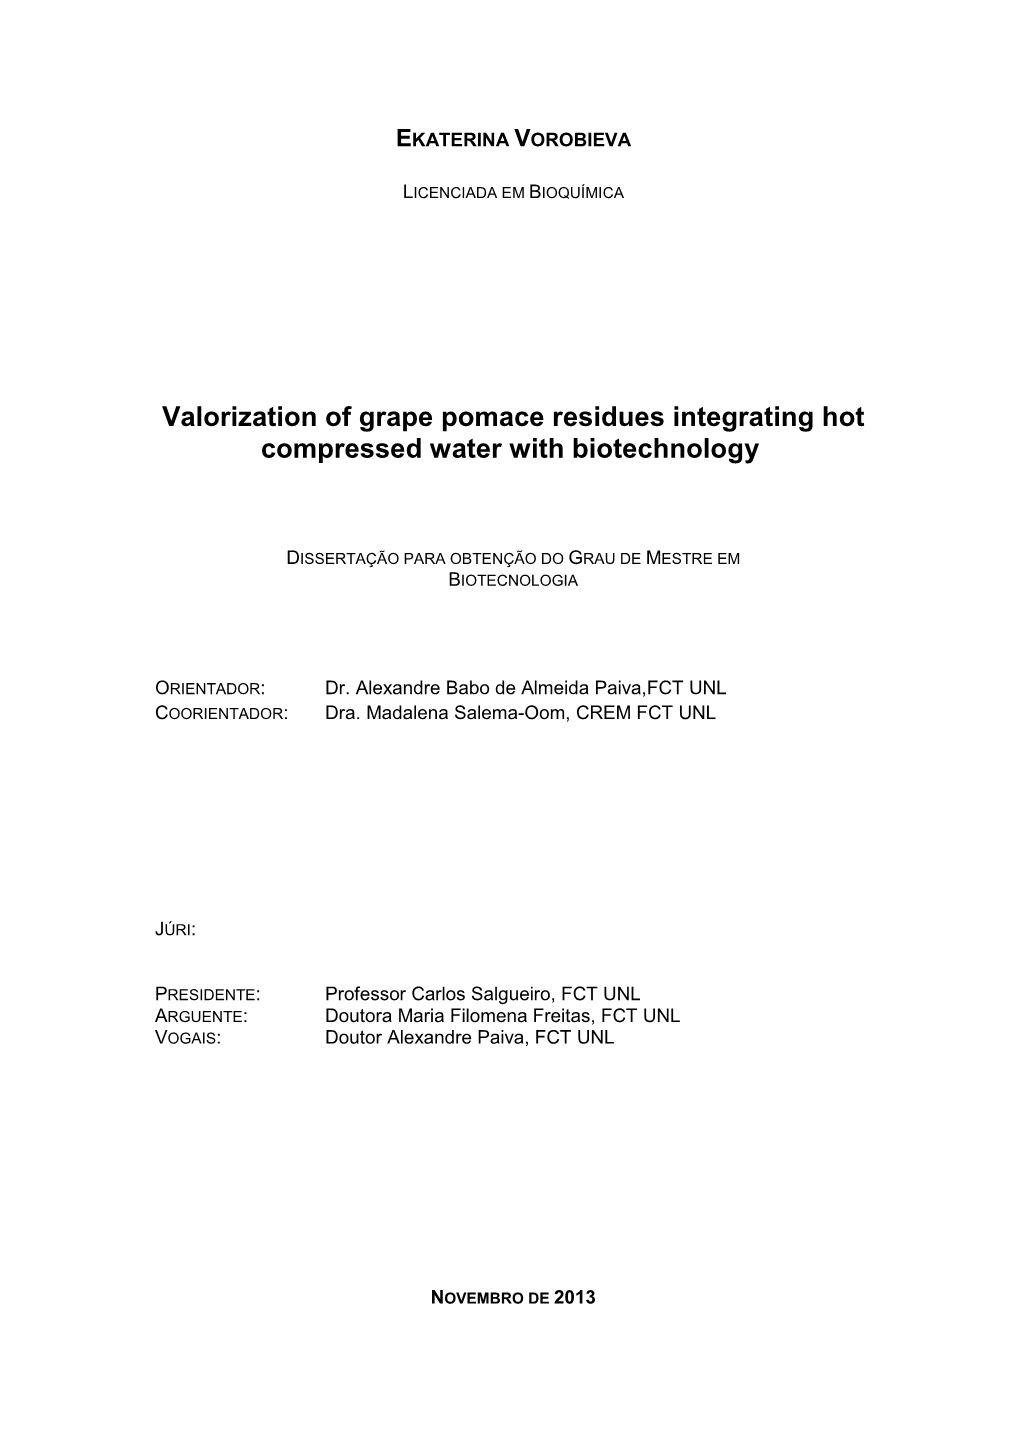 Valorization of Grape Pomace Residues Integrating Hot Compressed Water with Biotechnology